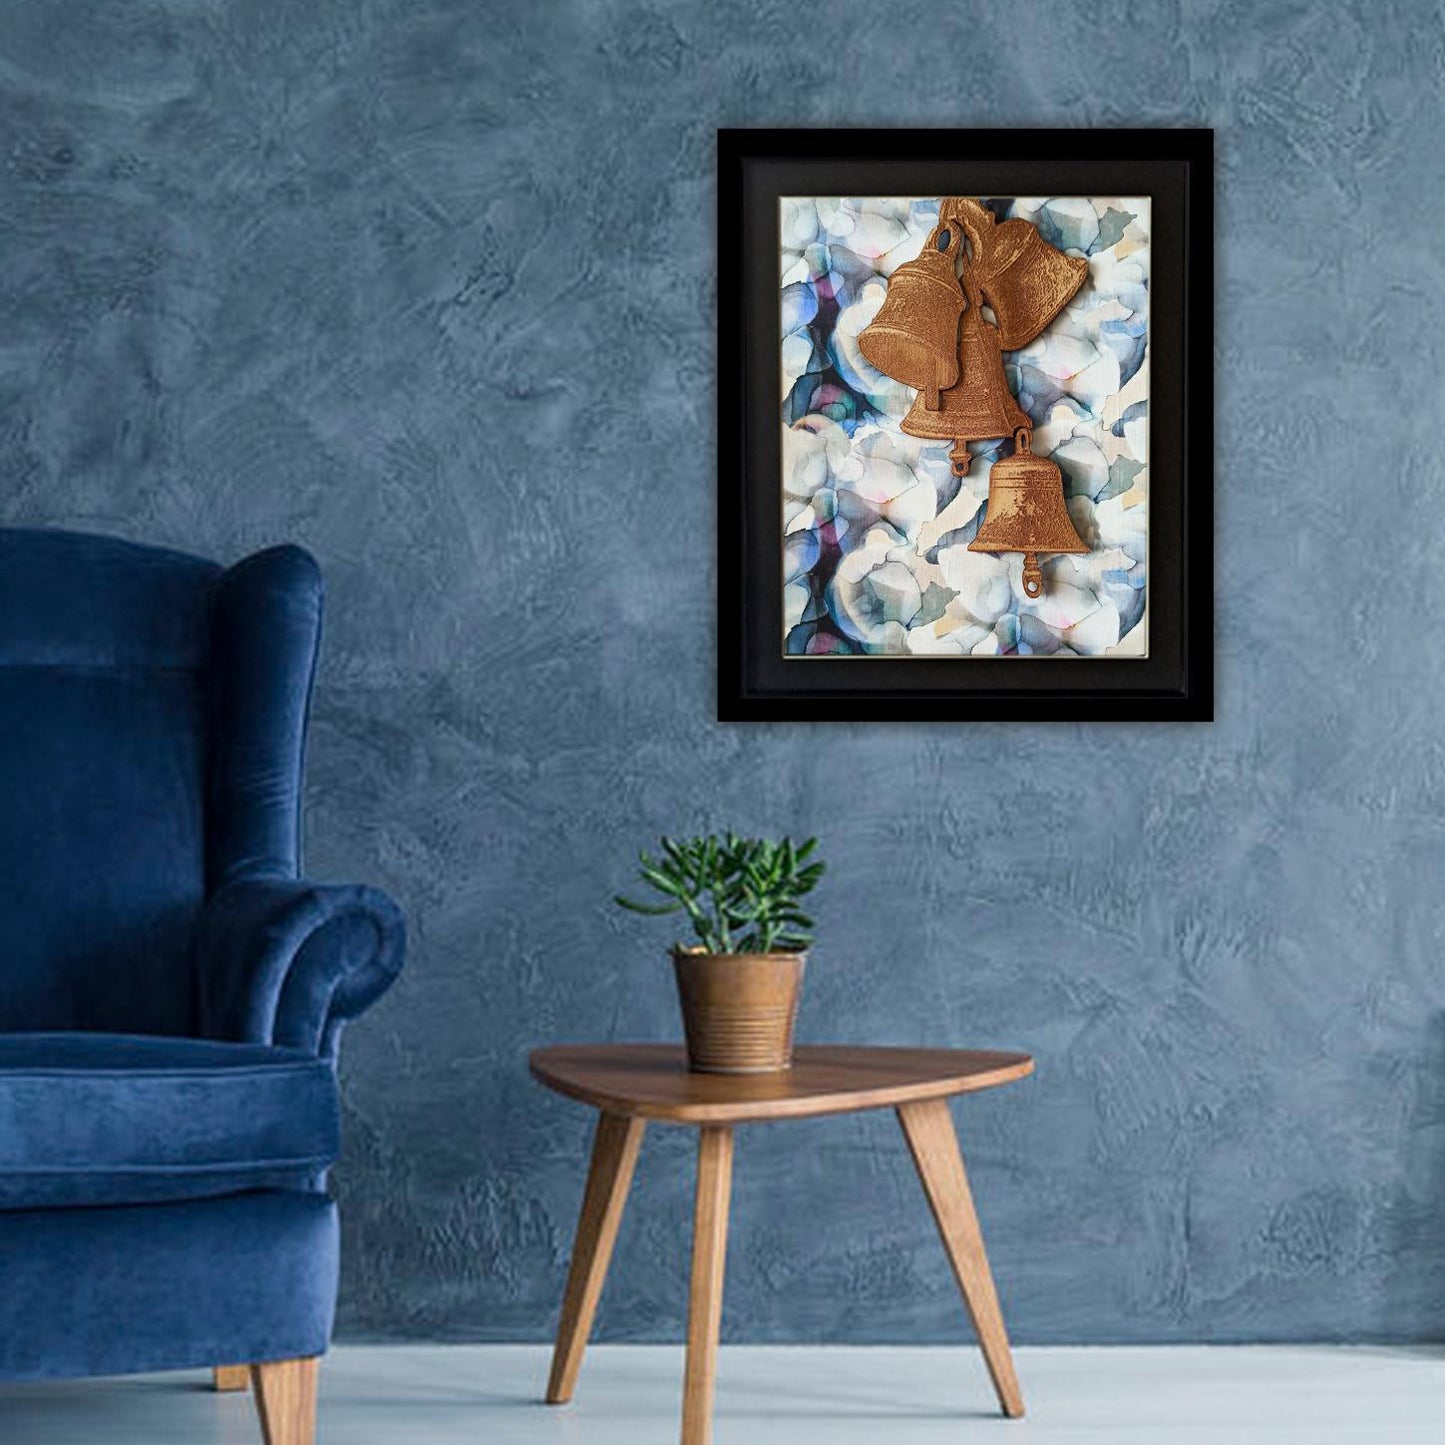 TEMPLE BELLS FRAME - Abstract Print on Modal Satin